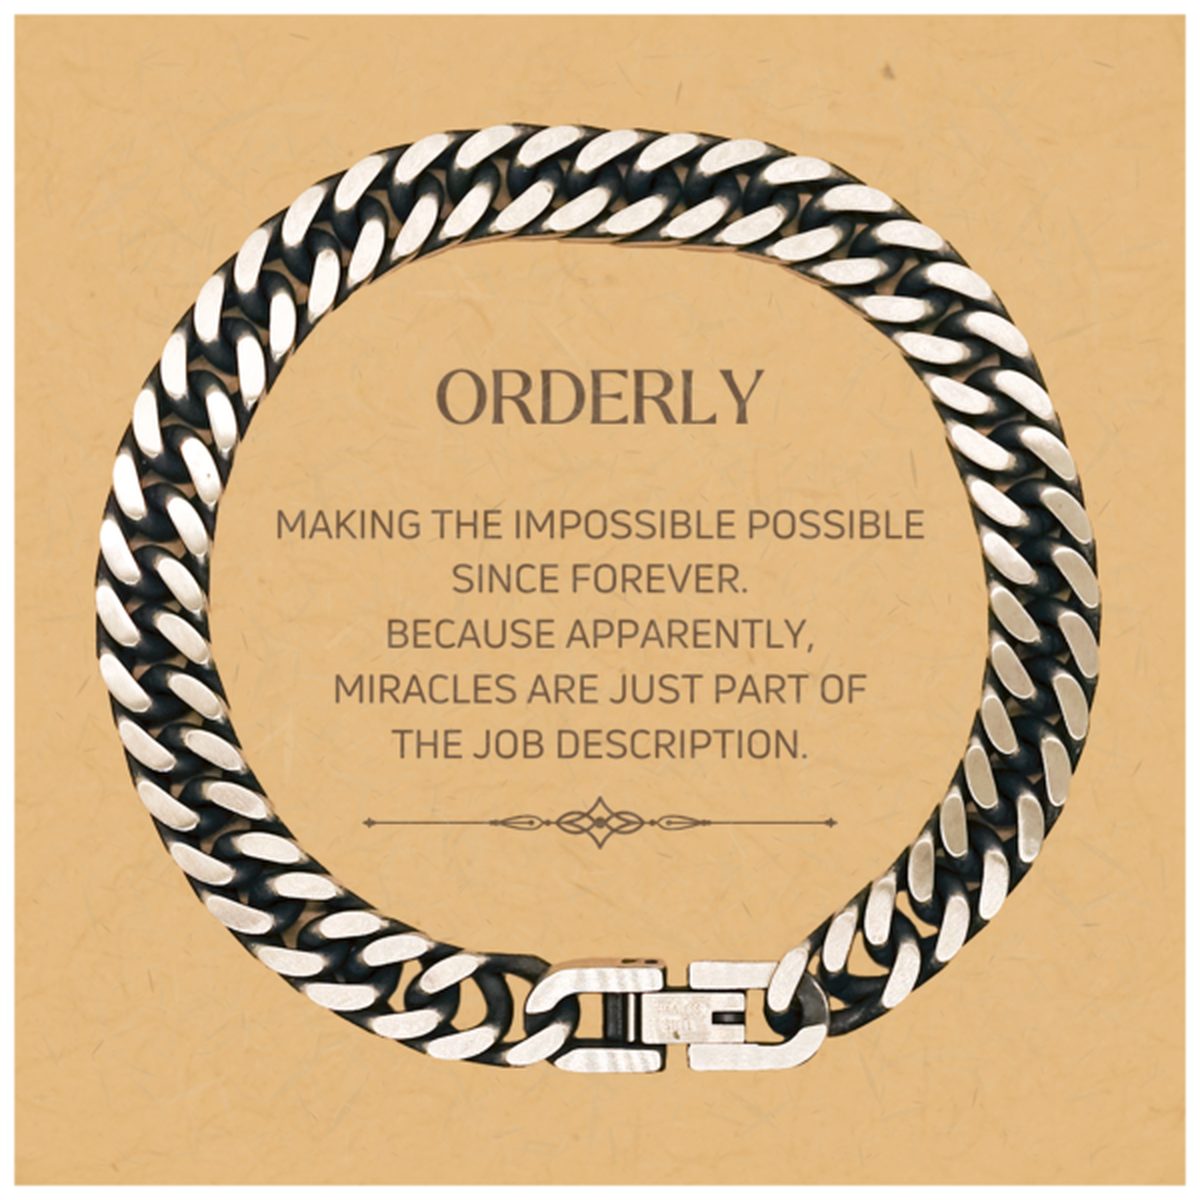 Funny Orderly Gifts, Miracles are just part of the job description, Inspirational Birthday Christmas Cuban Link Chain Bracelet For Orderly, Men, Women, Coworkers, Friends, Boss